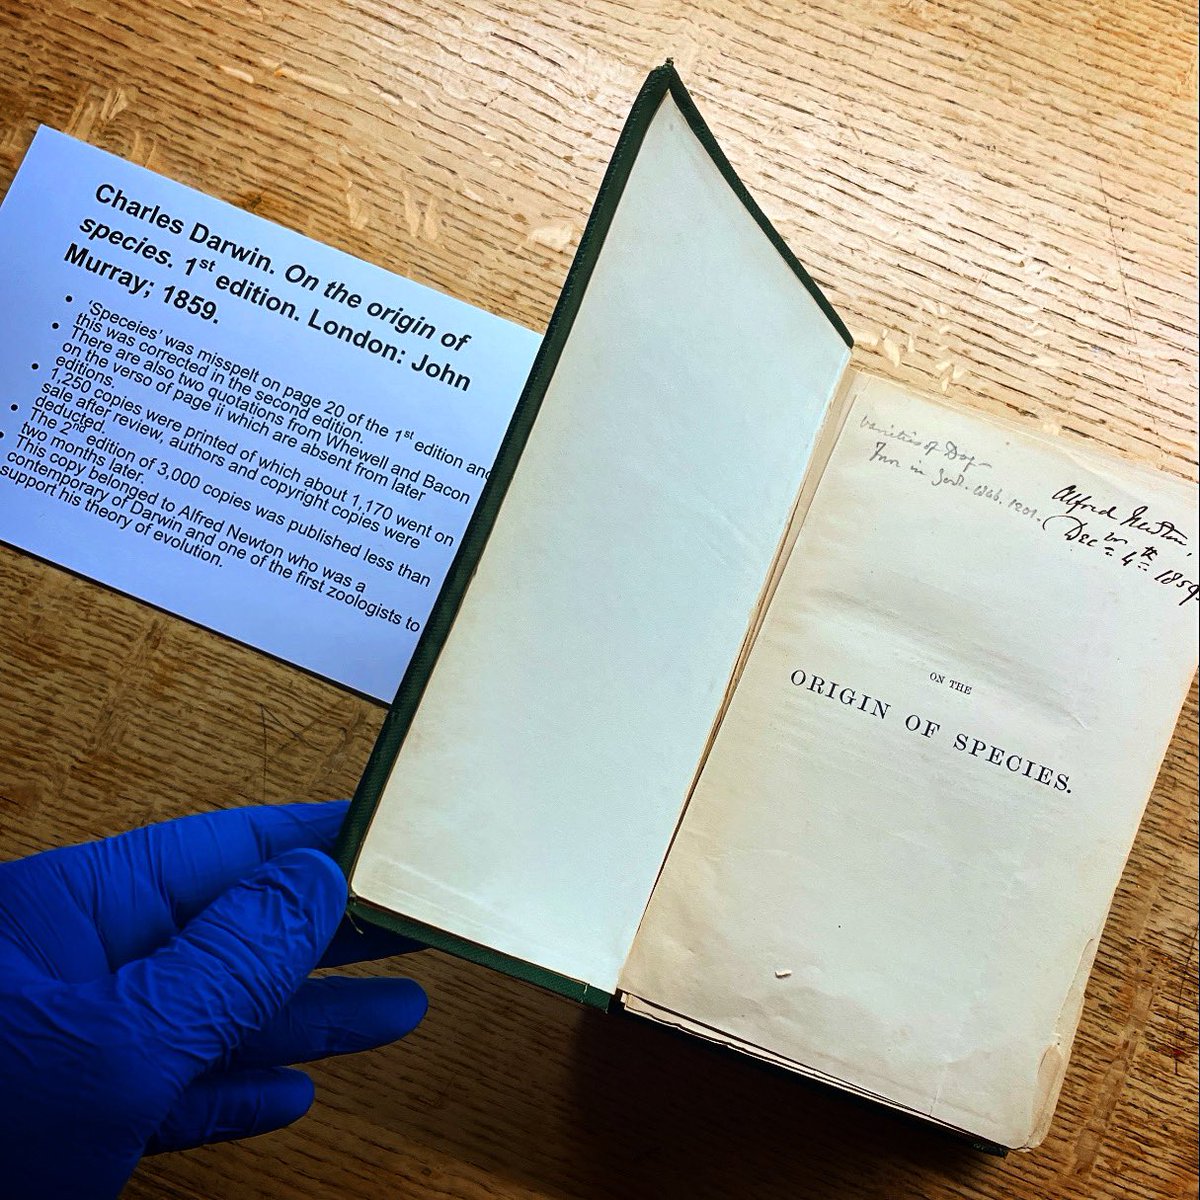 Charles Darwin’s “On the origin of species” 1st edition, with the typo on page 20. Courtesy of the Zoology Library @CamZoology @Cambridge_Uni